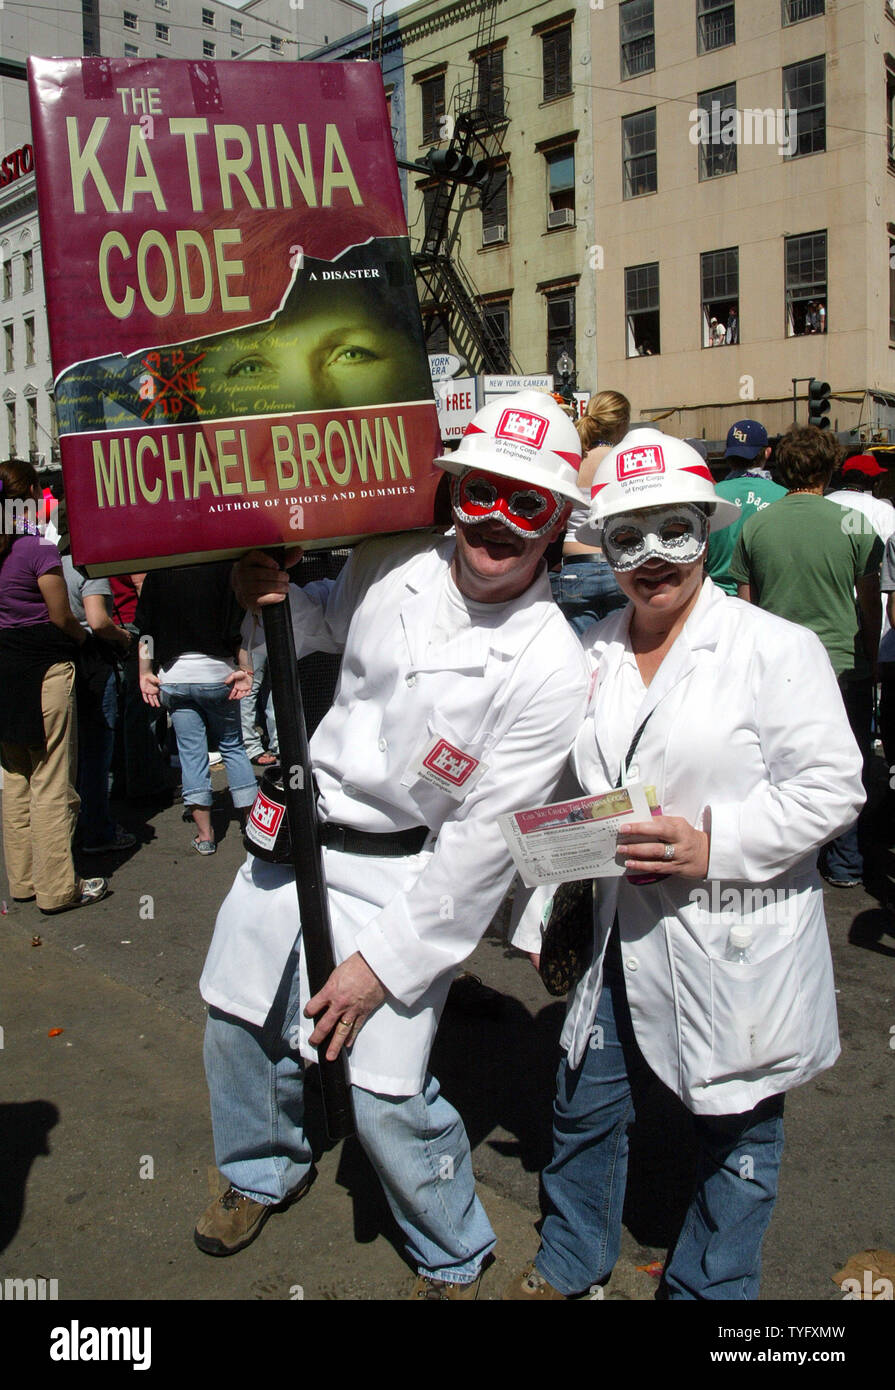 Spoofing  Michael Brown, the disgraced former director of the Federal Emergency Management Agency, Maurice and Nancy Trosclair costume on Canal Street in  New Orleans on Mardi Gras, February 28, 2006.  Six months after Hurricane Katrina wrecked the region, somewhat smaller but enthusiastic crowds turned out to celebrate Fat Tuesday. (UPI Photo/A.J. Sisco) Stock Photo